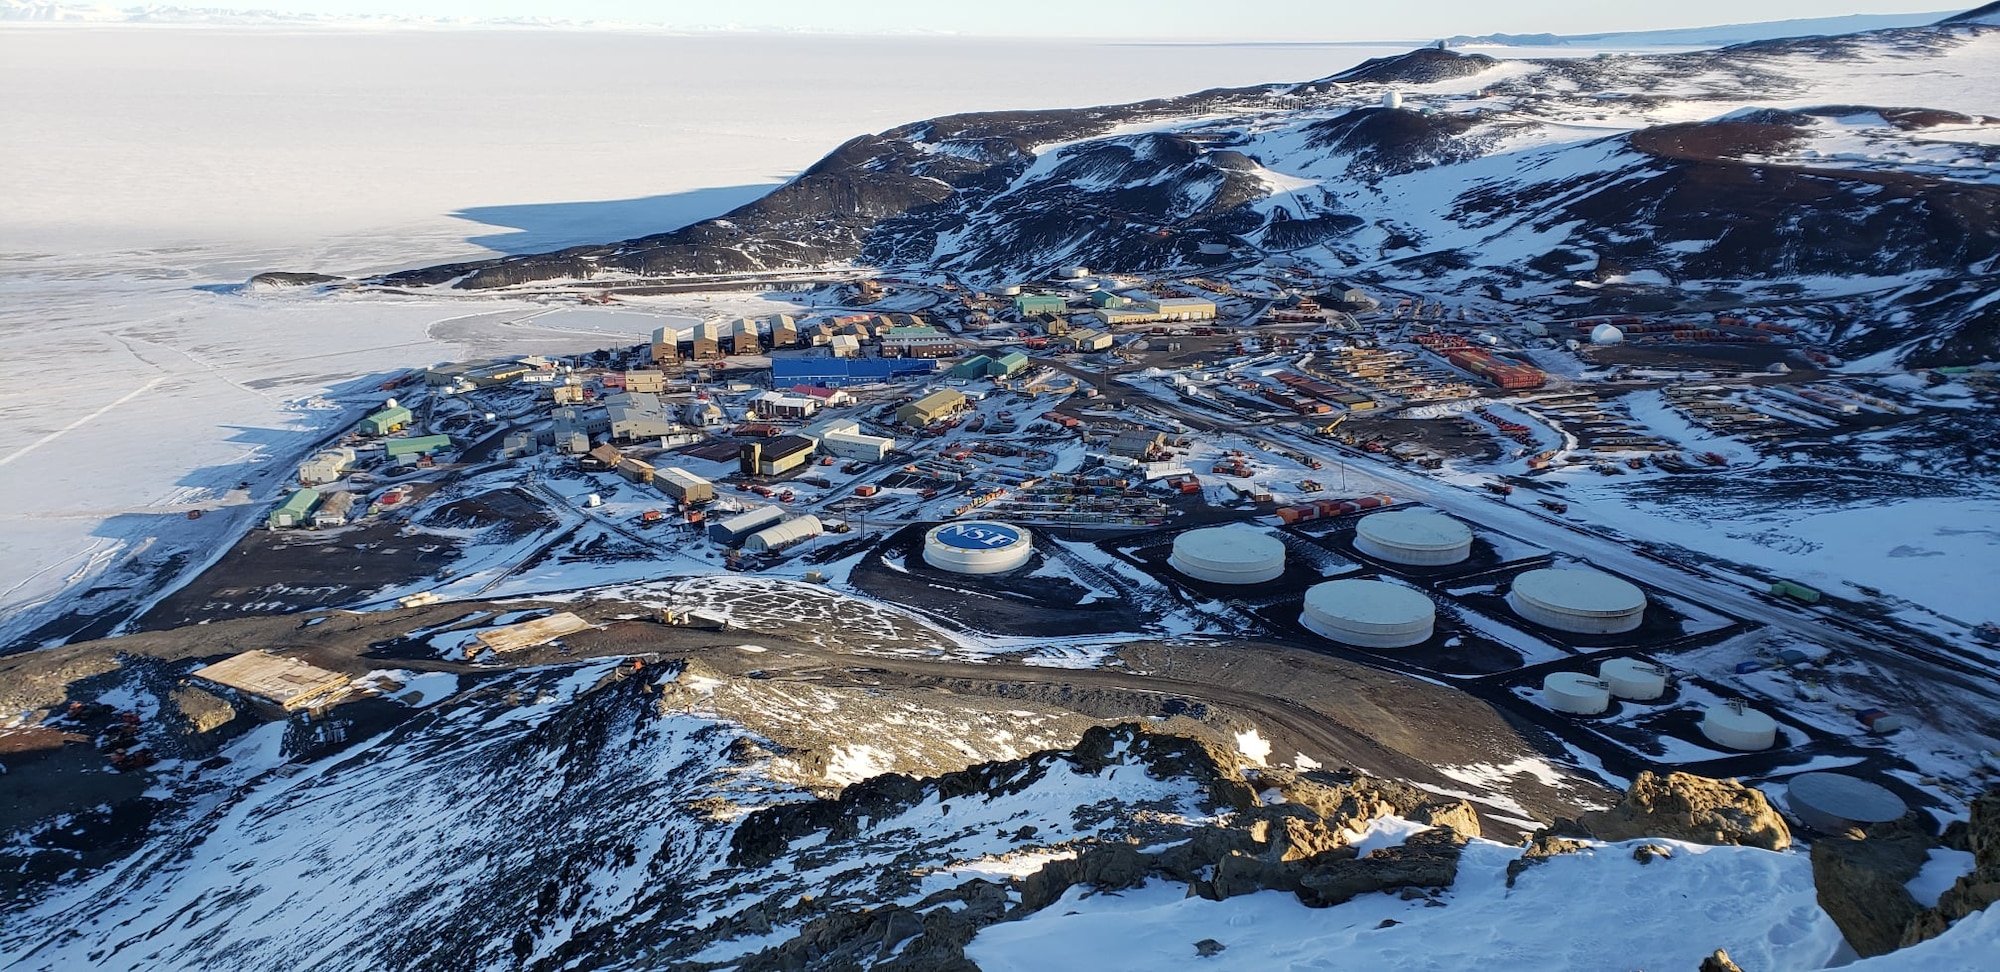 The McMurdo Station in Antarctica, in 2021.